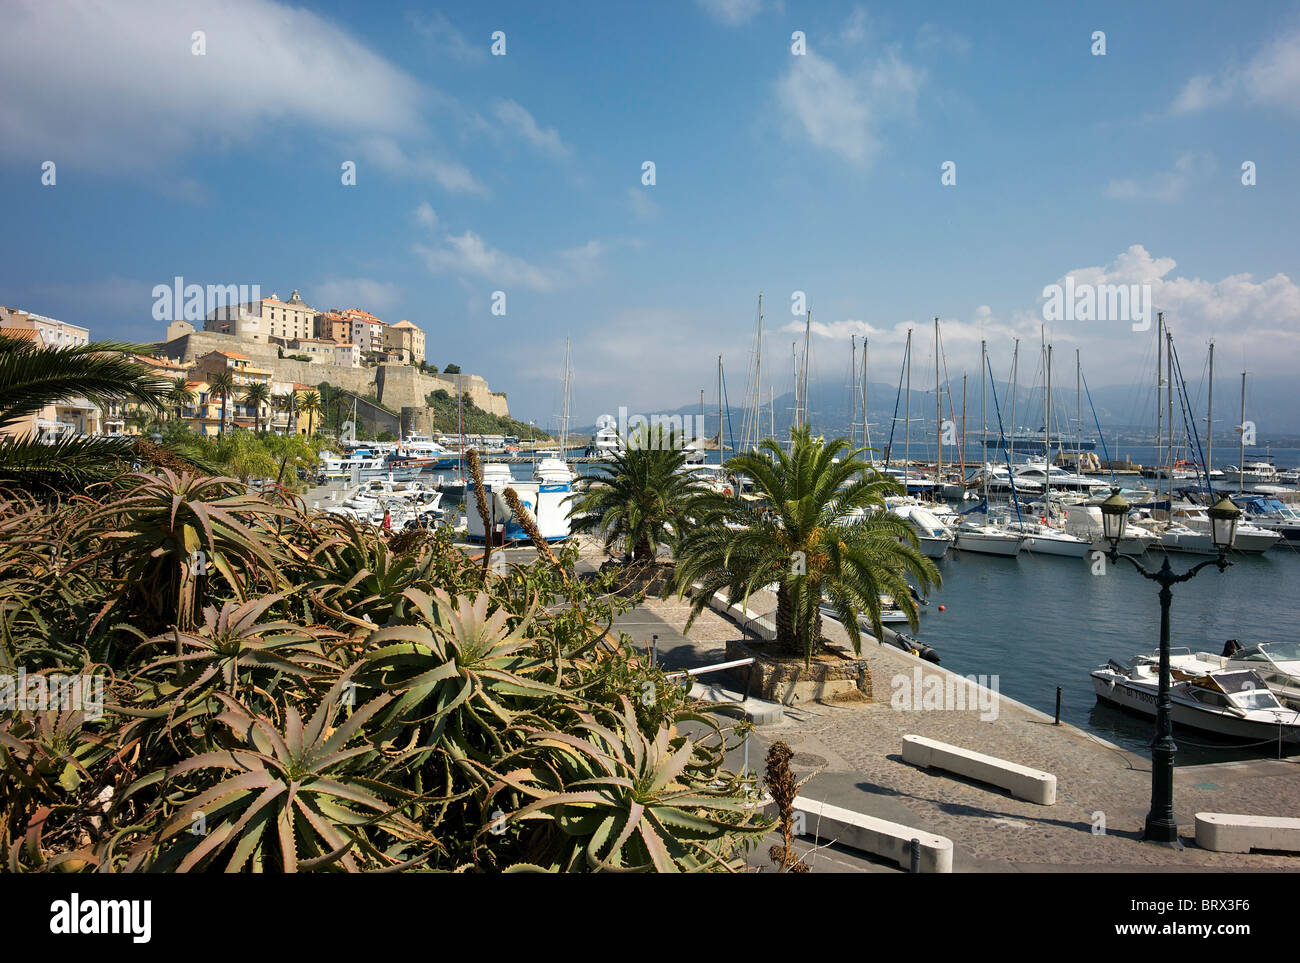 General view of yachts in the Calvi Marina, with the citadel in distance. Stock Photo